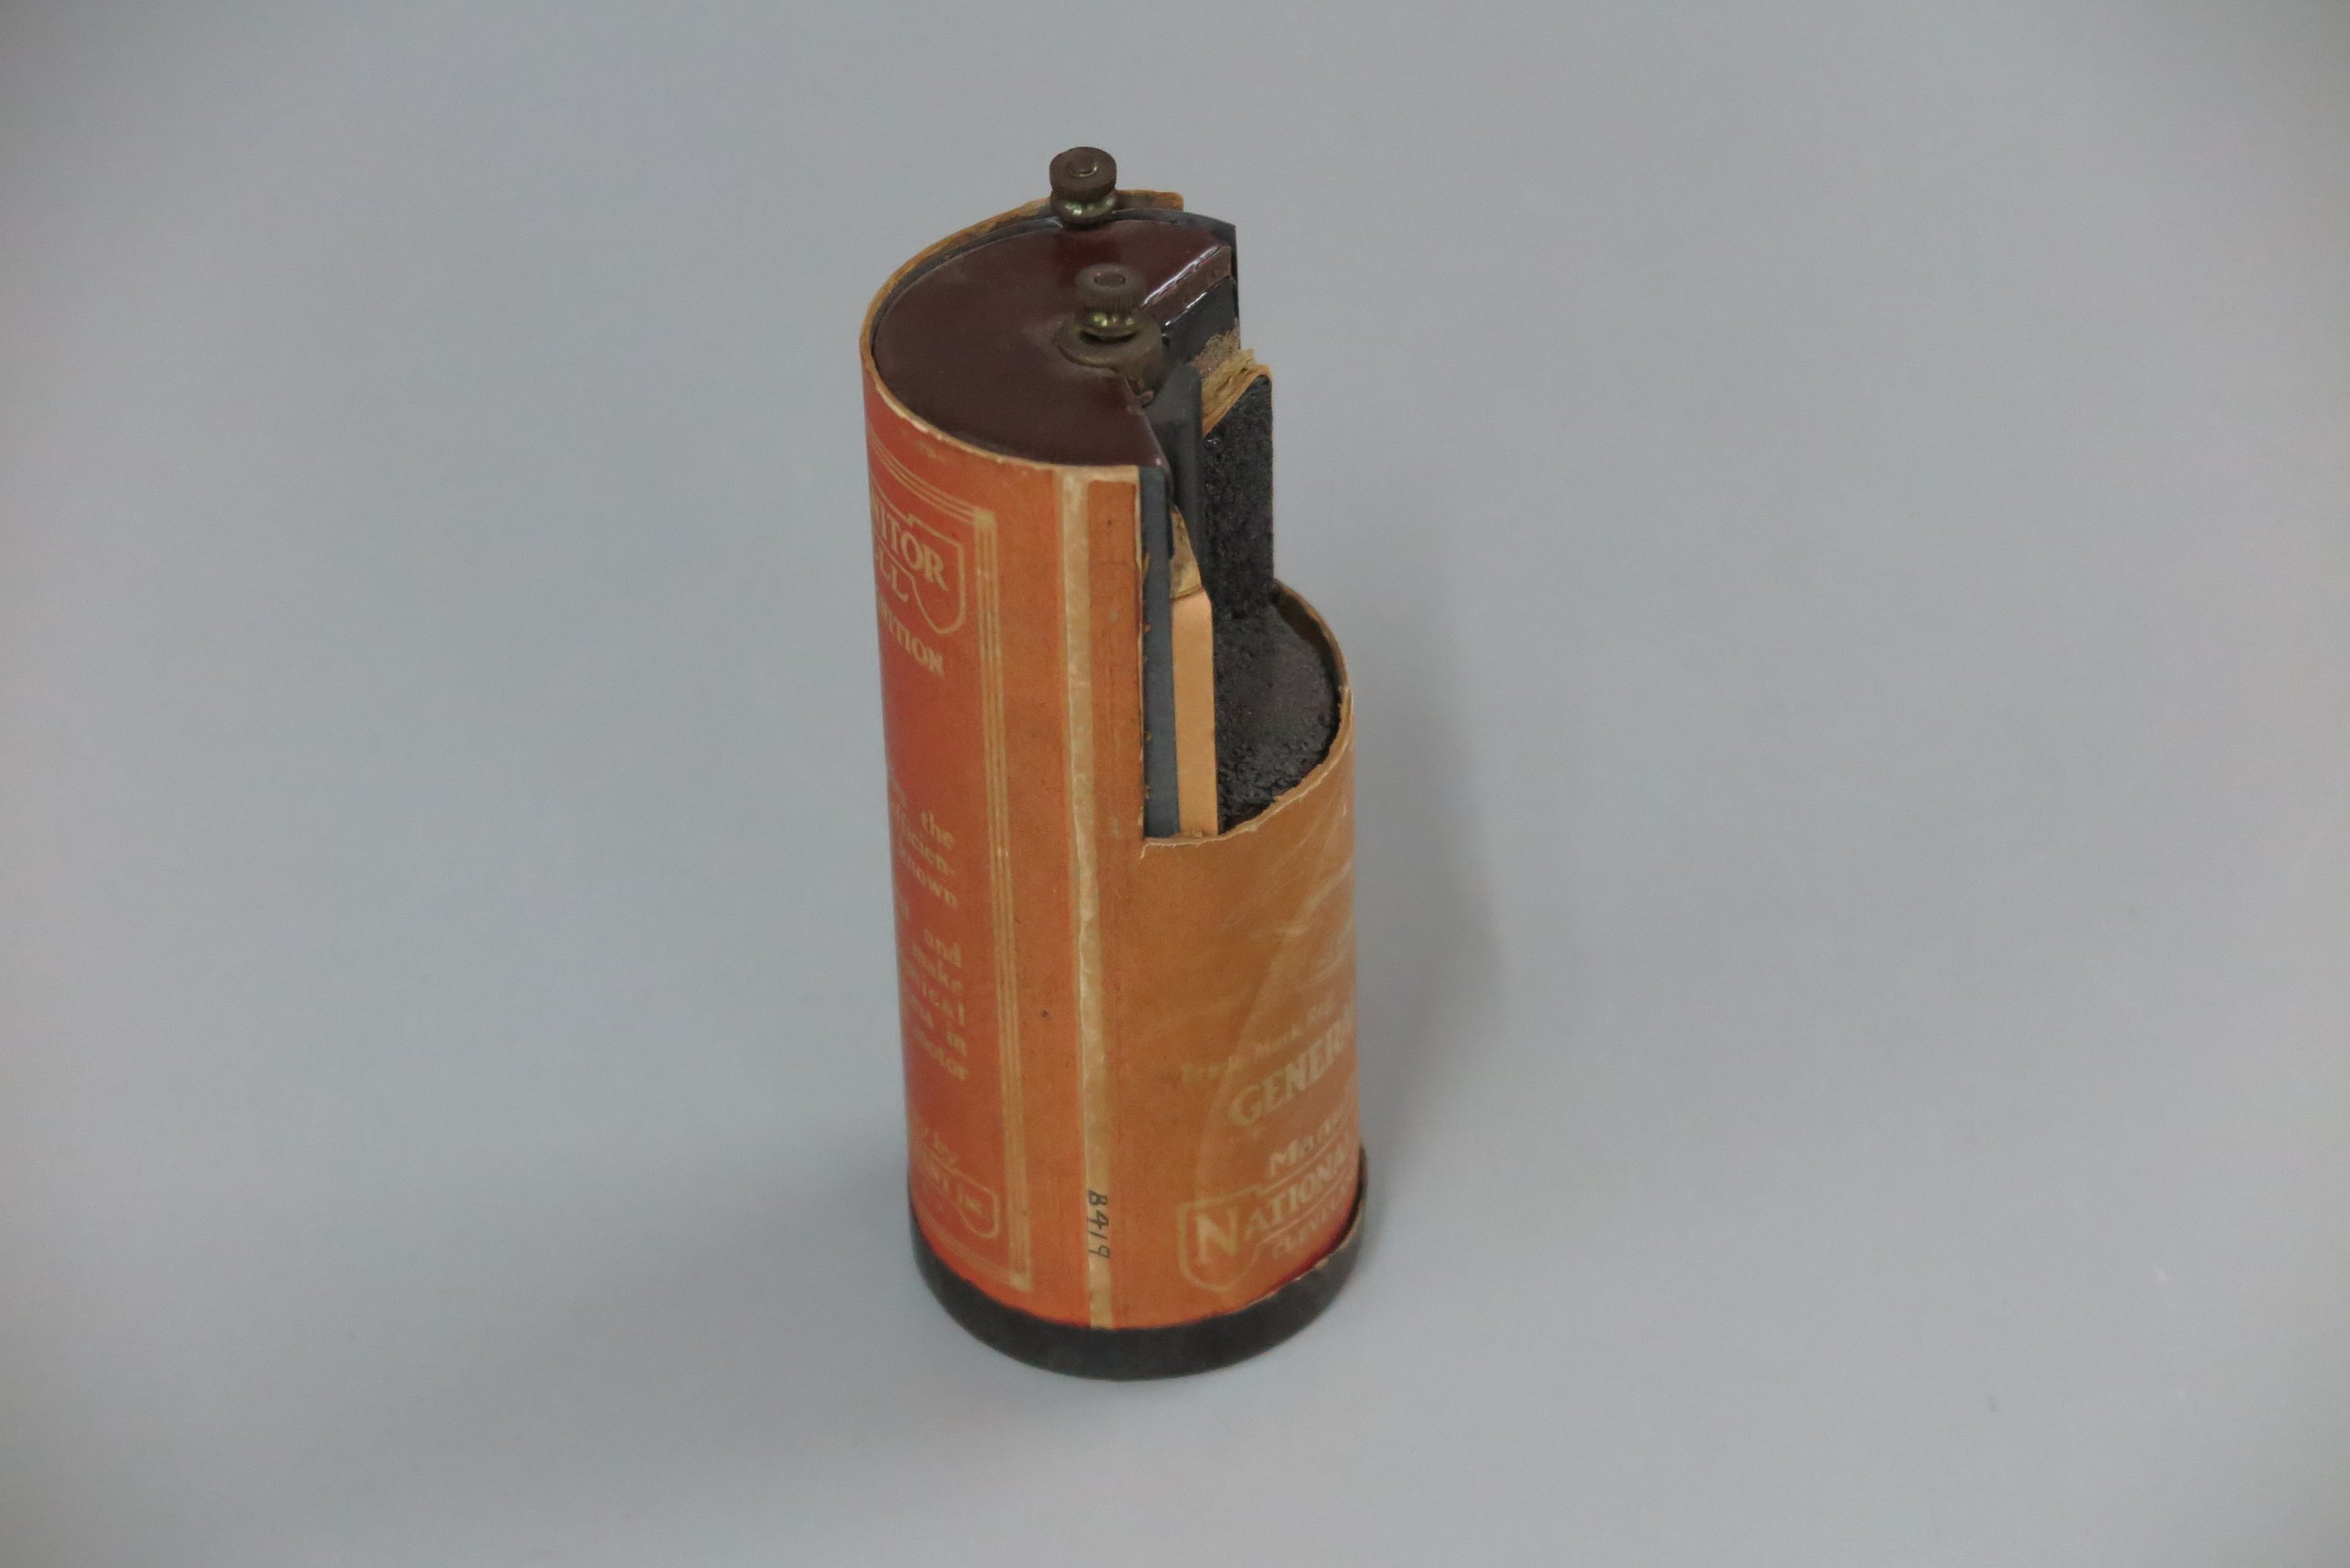 Battery sectioned to show its parts